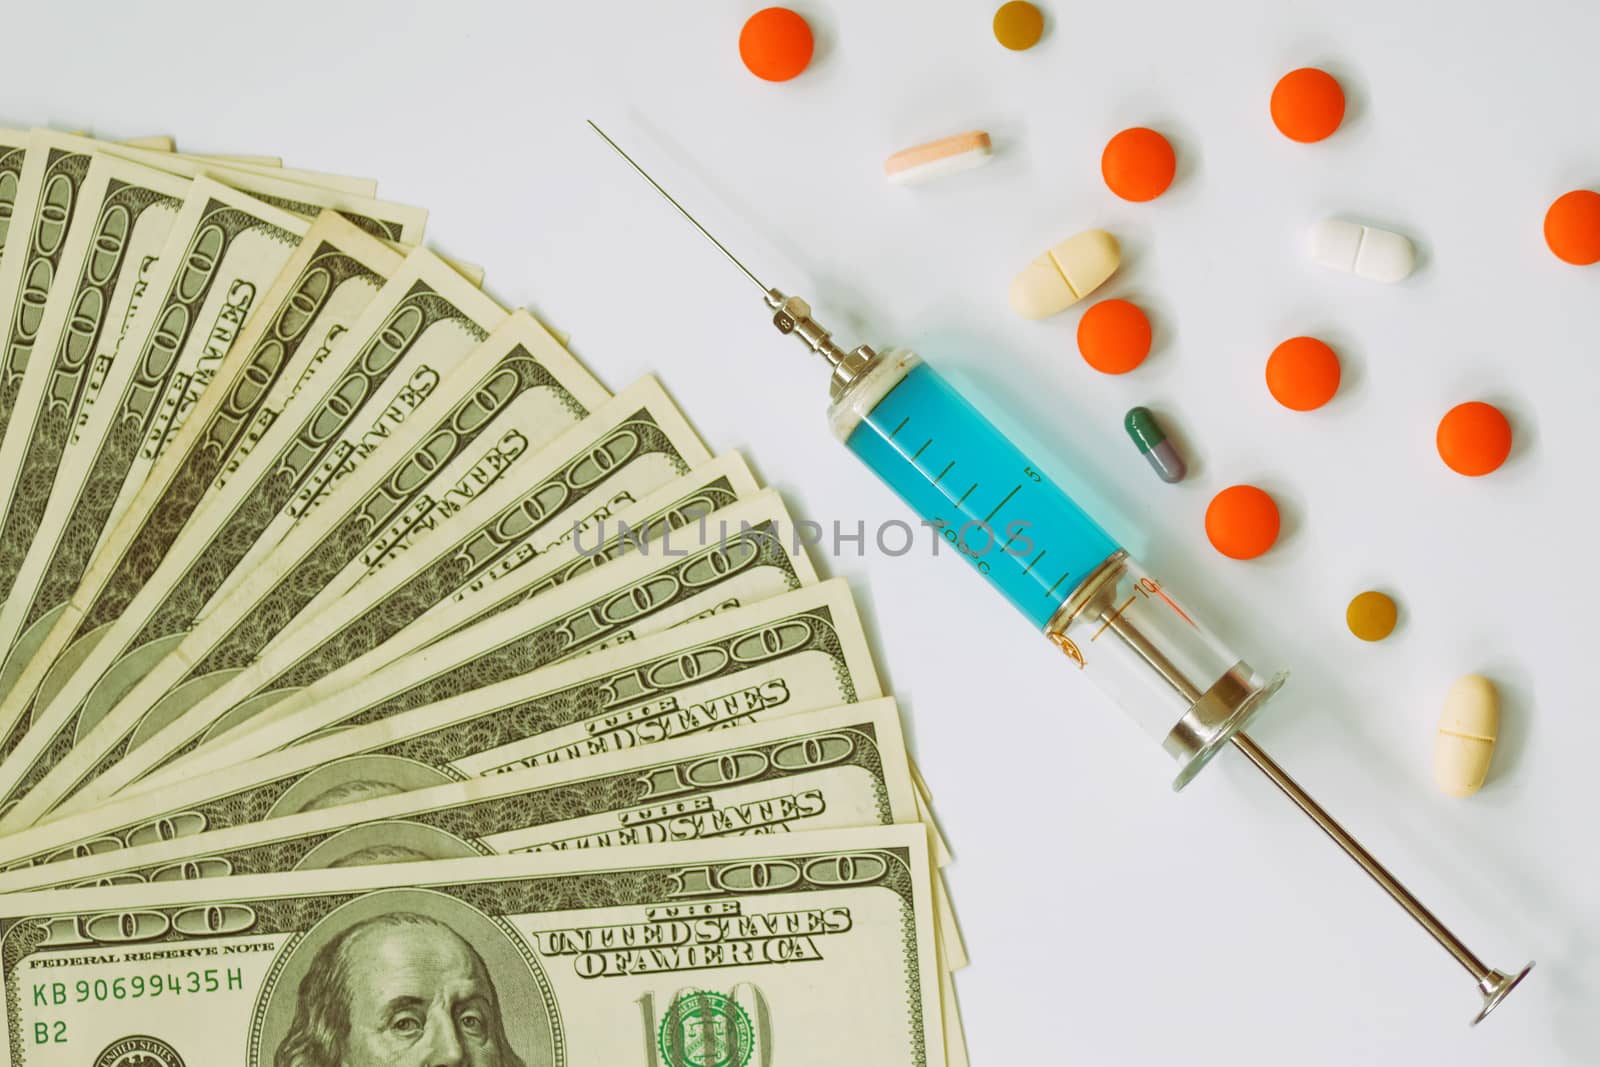 expensive medicine and healthcare, injection needle, pills and banknotes